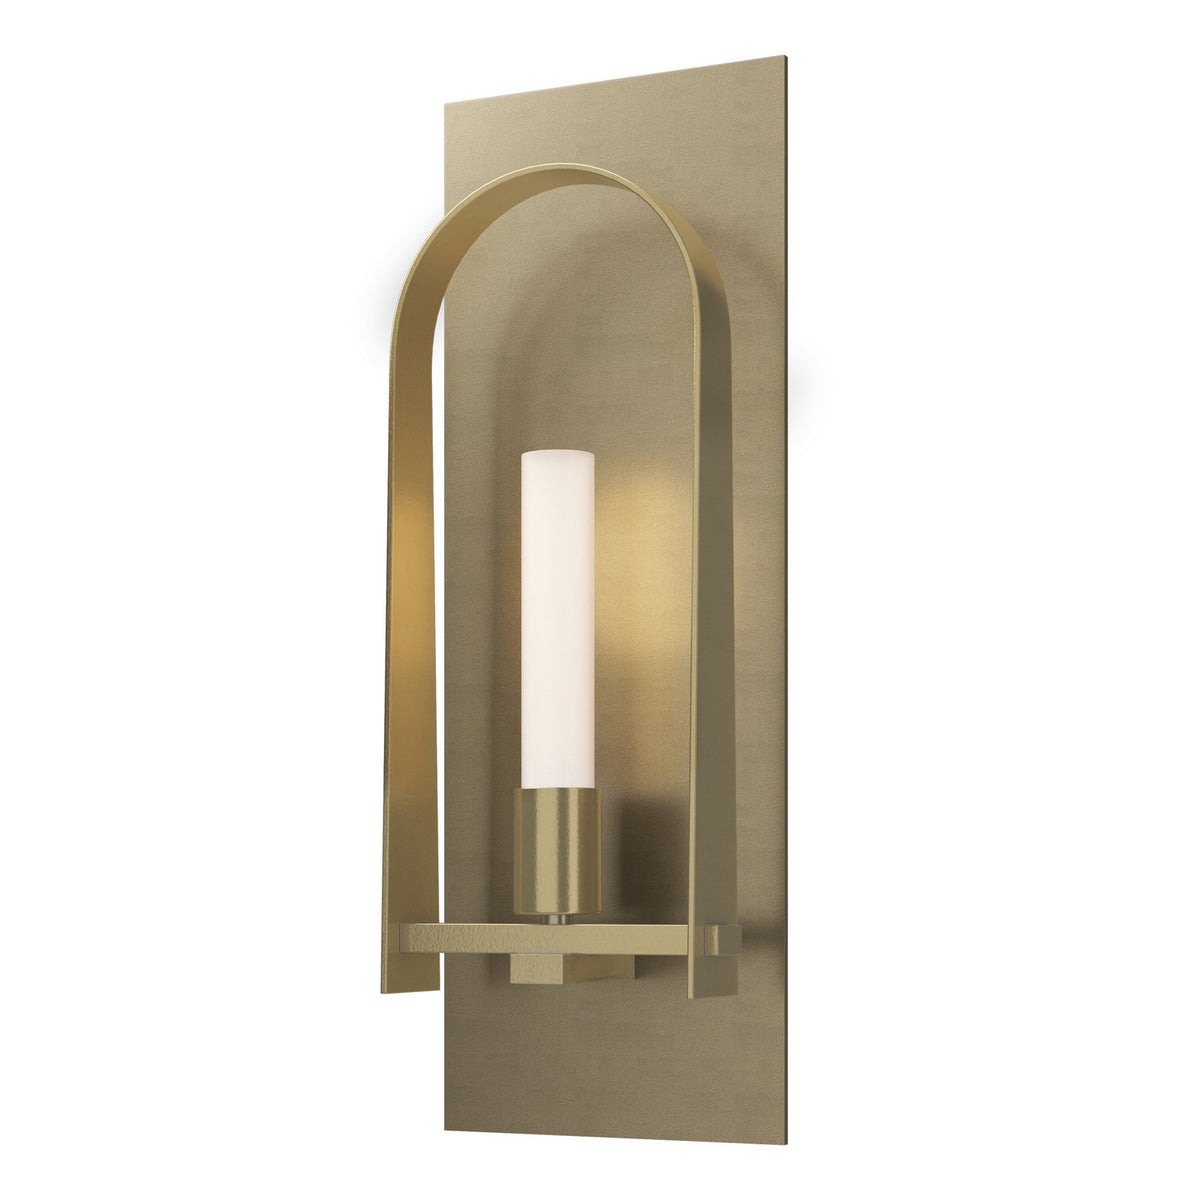 Hubbardton Forge - 201070-SKT-84-86-FD0462 - One Light Wall Sconce - Triomphe - Soft Gold